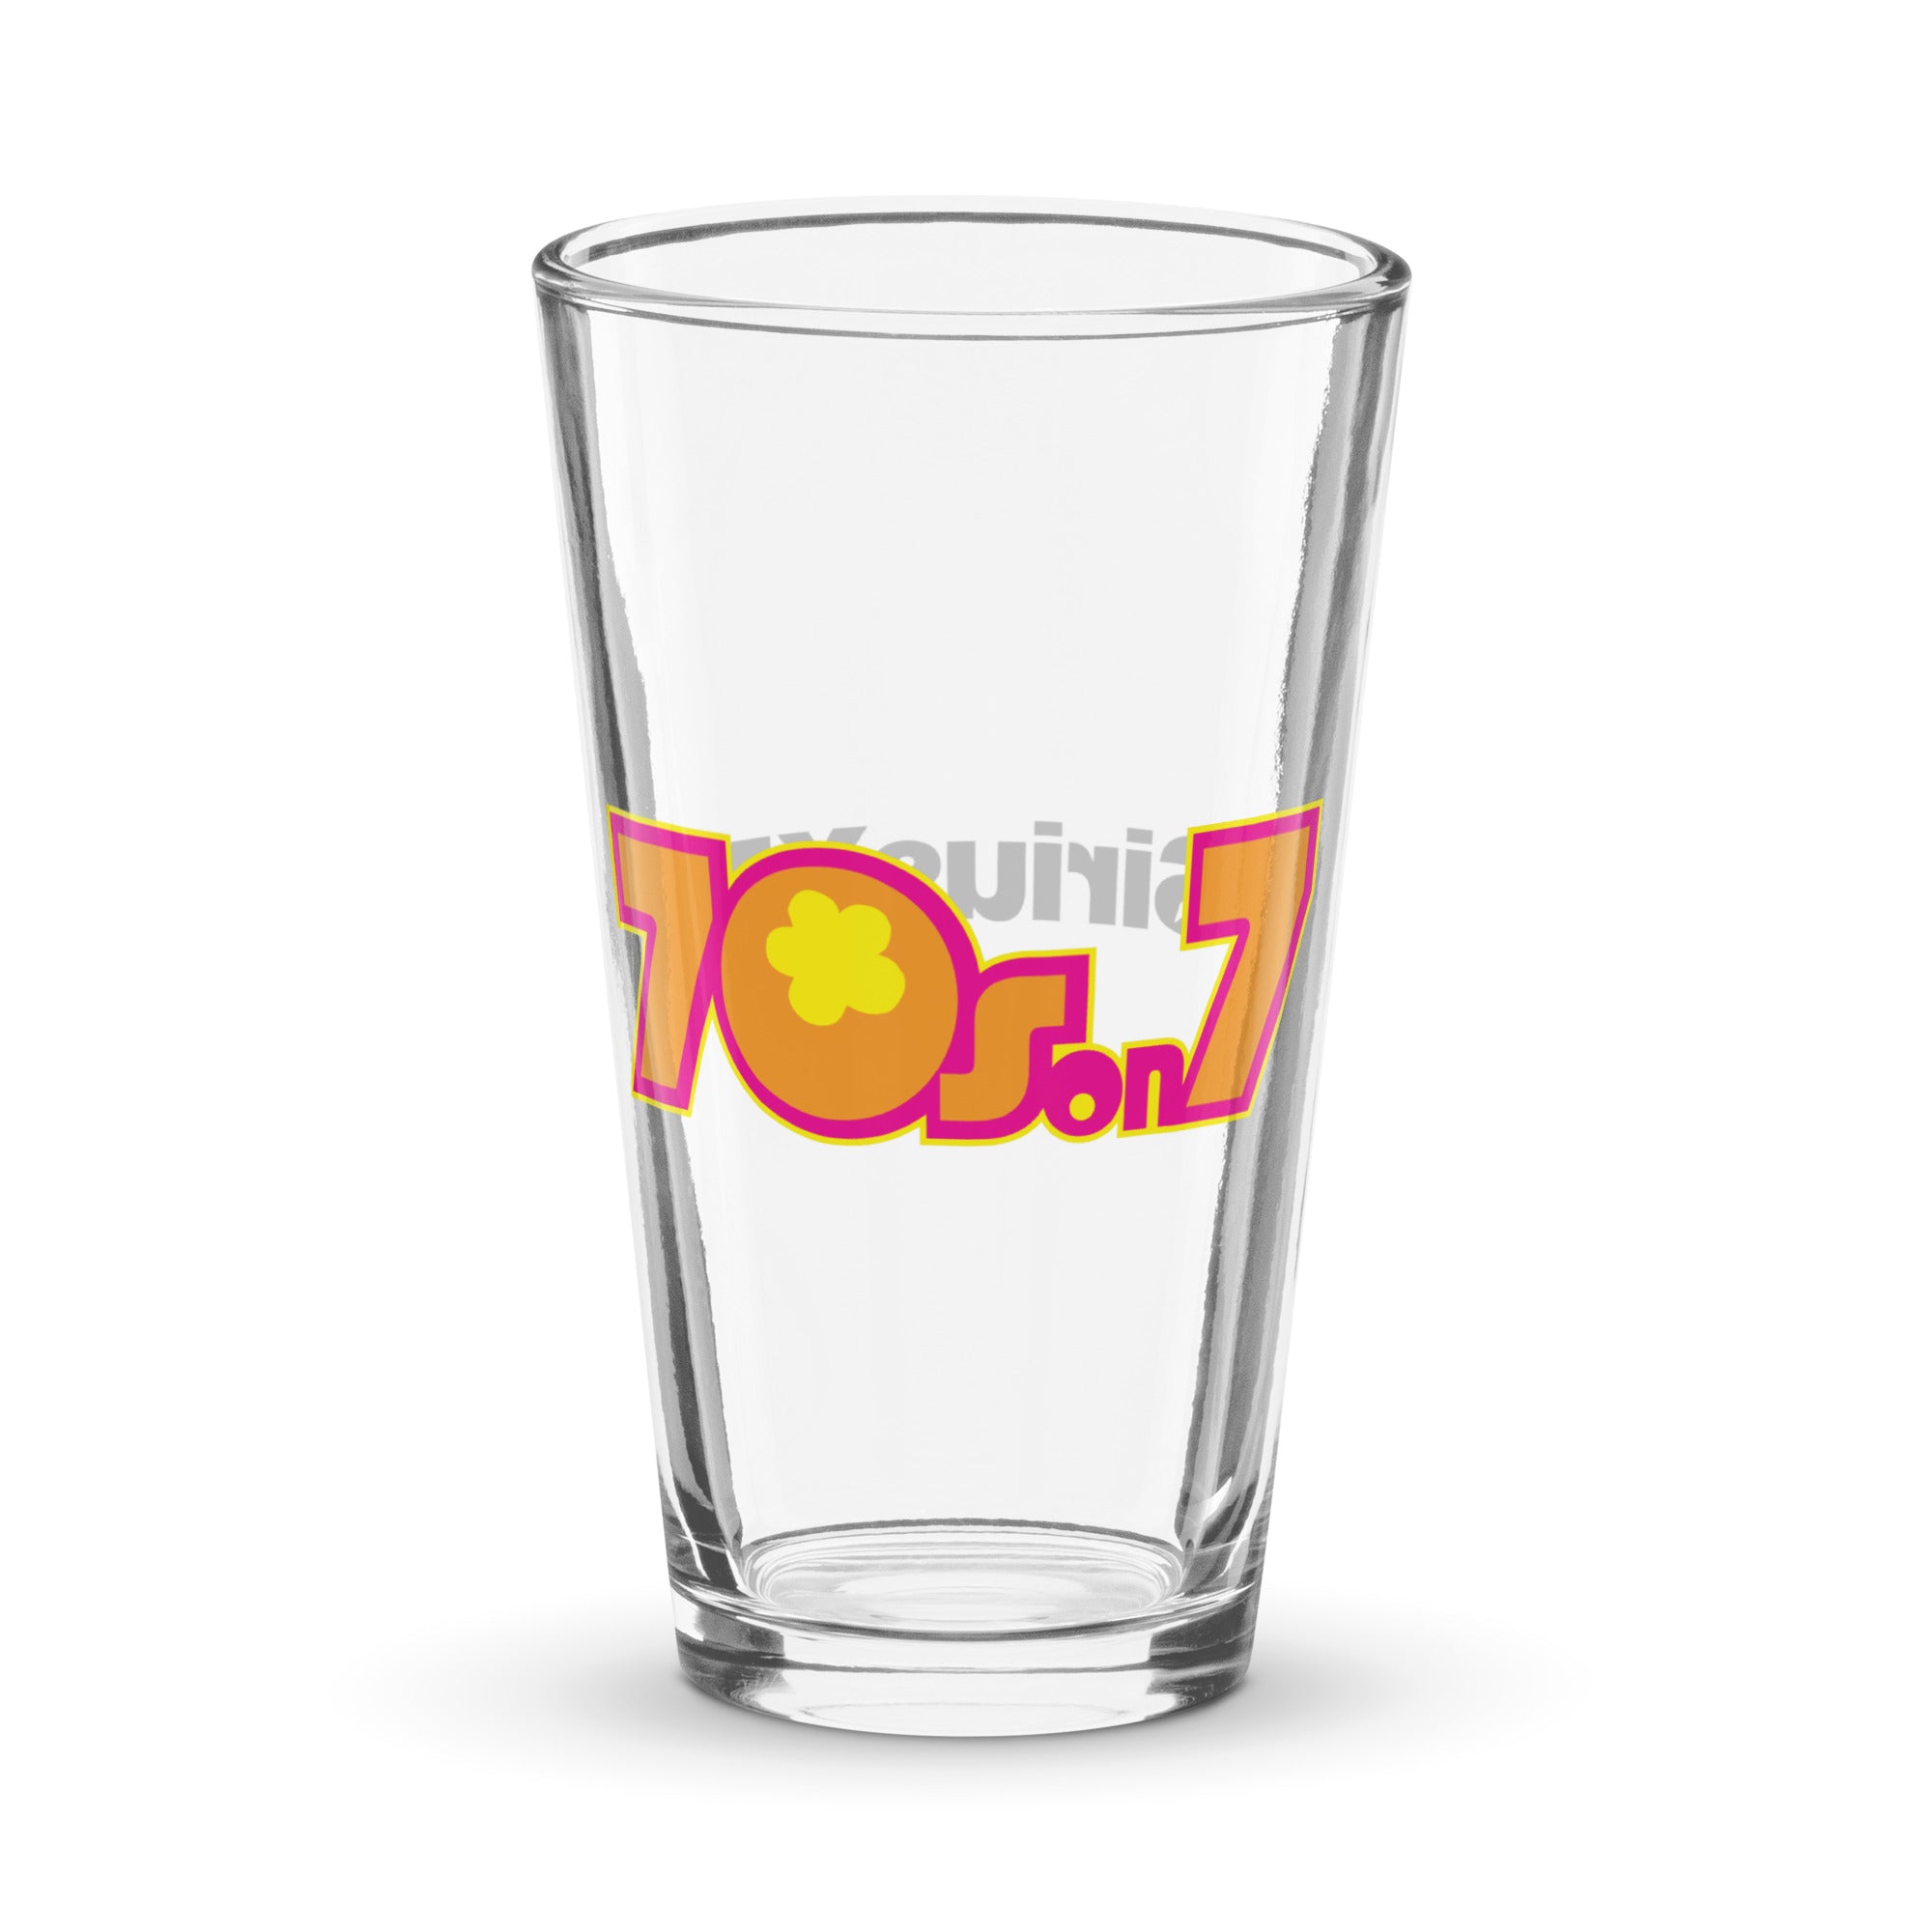 70s on 7: Pint Glass